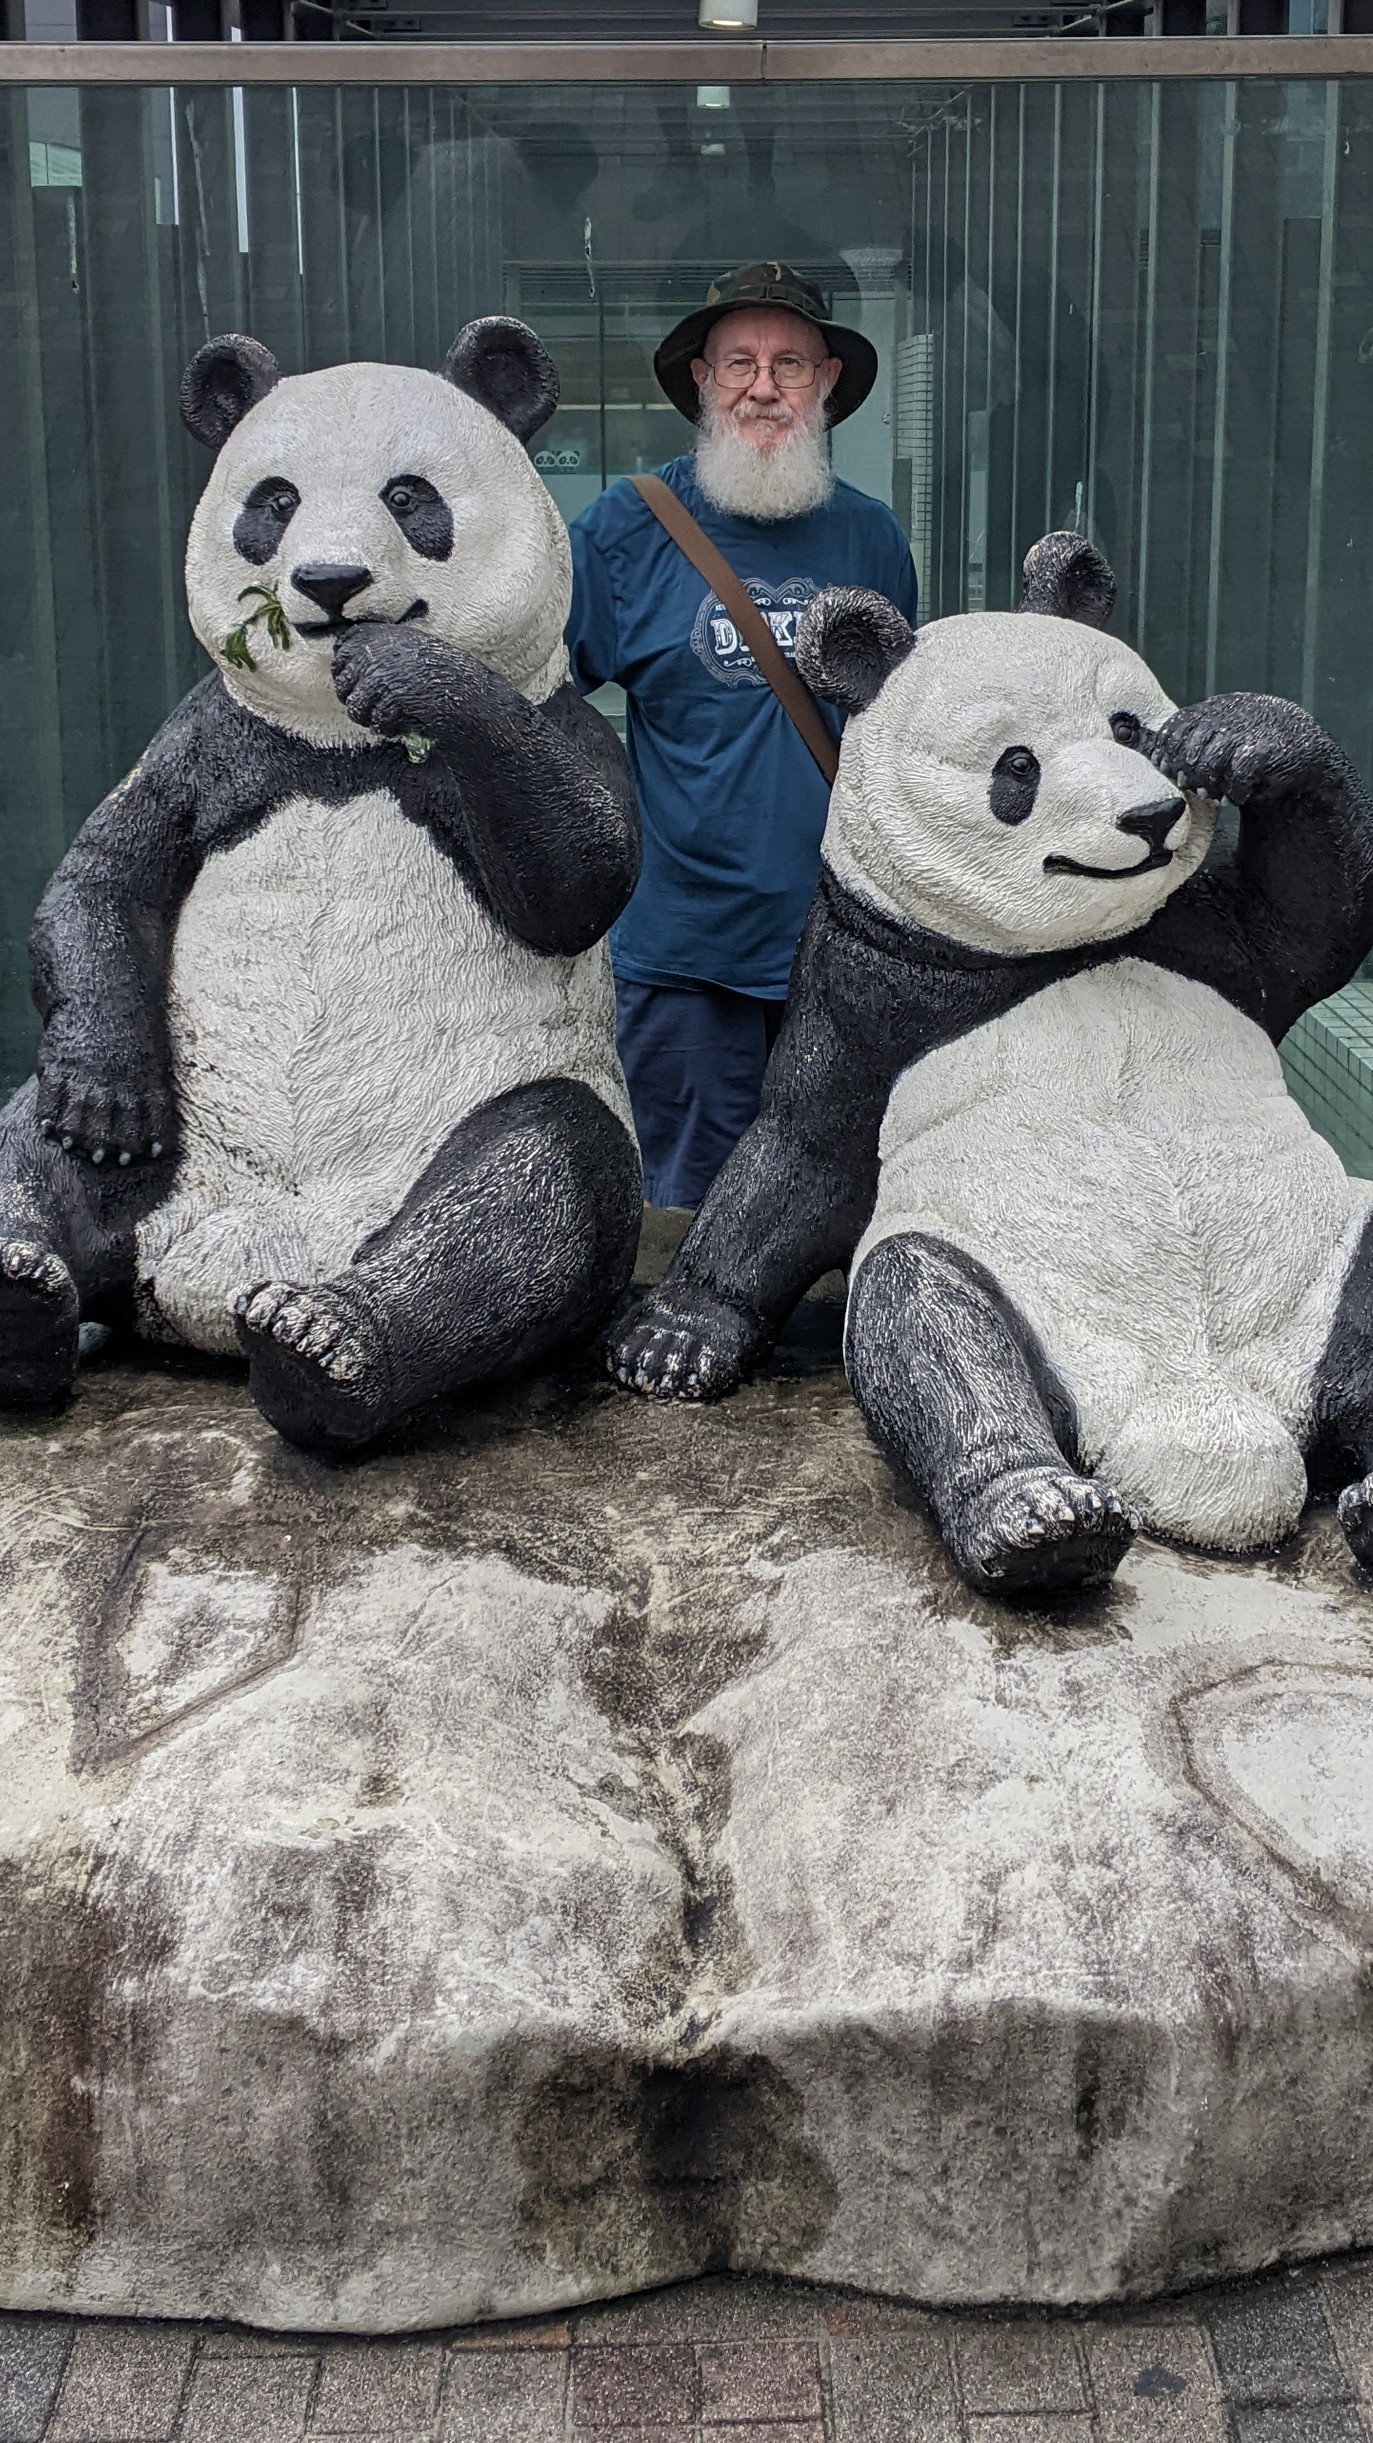 Chris behind a statue of two pandas